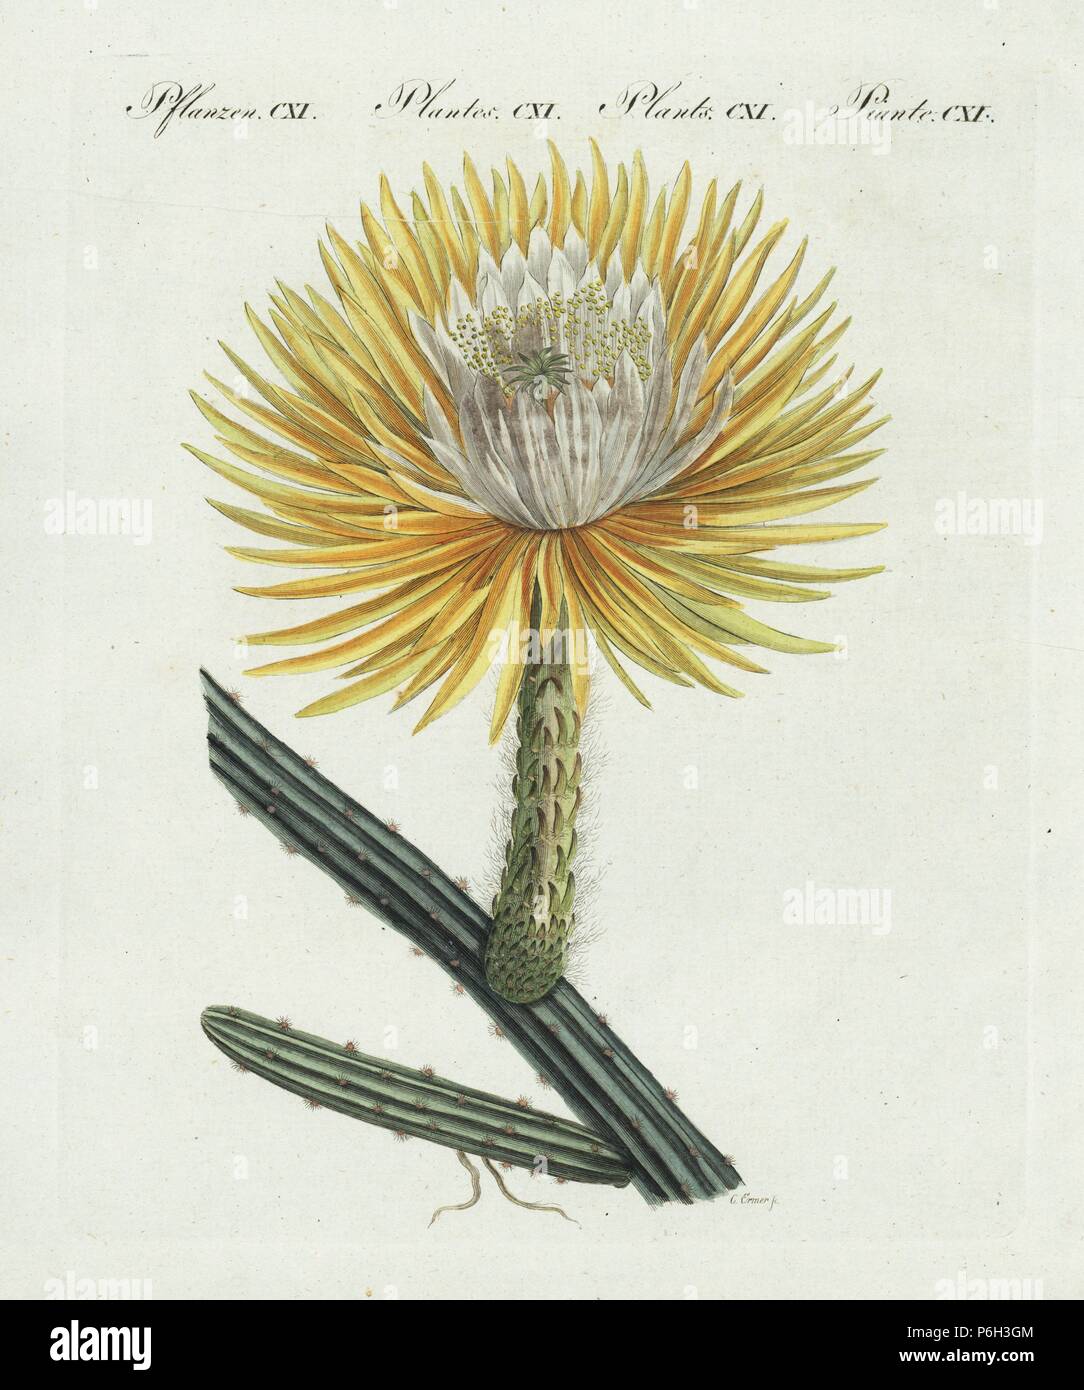 Nightblooming cereus, Selenicereus grandiflorus (Cactus grandiflora). Engraved by C. Ermer after Candolle and Redoute, 'Plantarum Historia Succulentarum.' Handcoloured copperplate engraving from Bertuch's 'Bilderbuch fur Kinder' (Picture Book for Children), Weimar, 1807. Friedrich Johann Bertuch (1747-1822) was a German publisher and man of arts most famous for his 12-volume encyclopedia for children illustrated with 1,200 engraved plates on natural history, science, costume, mythology, etc., published from 1790-1830. Stock Photo